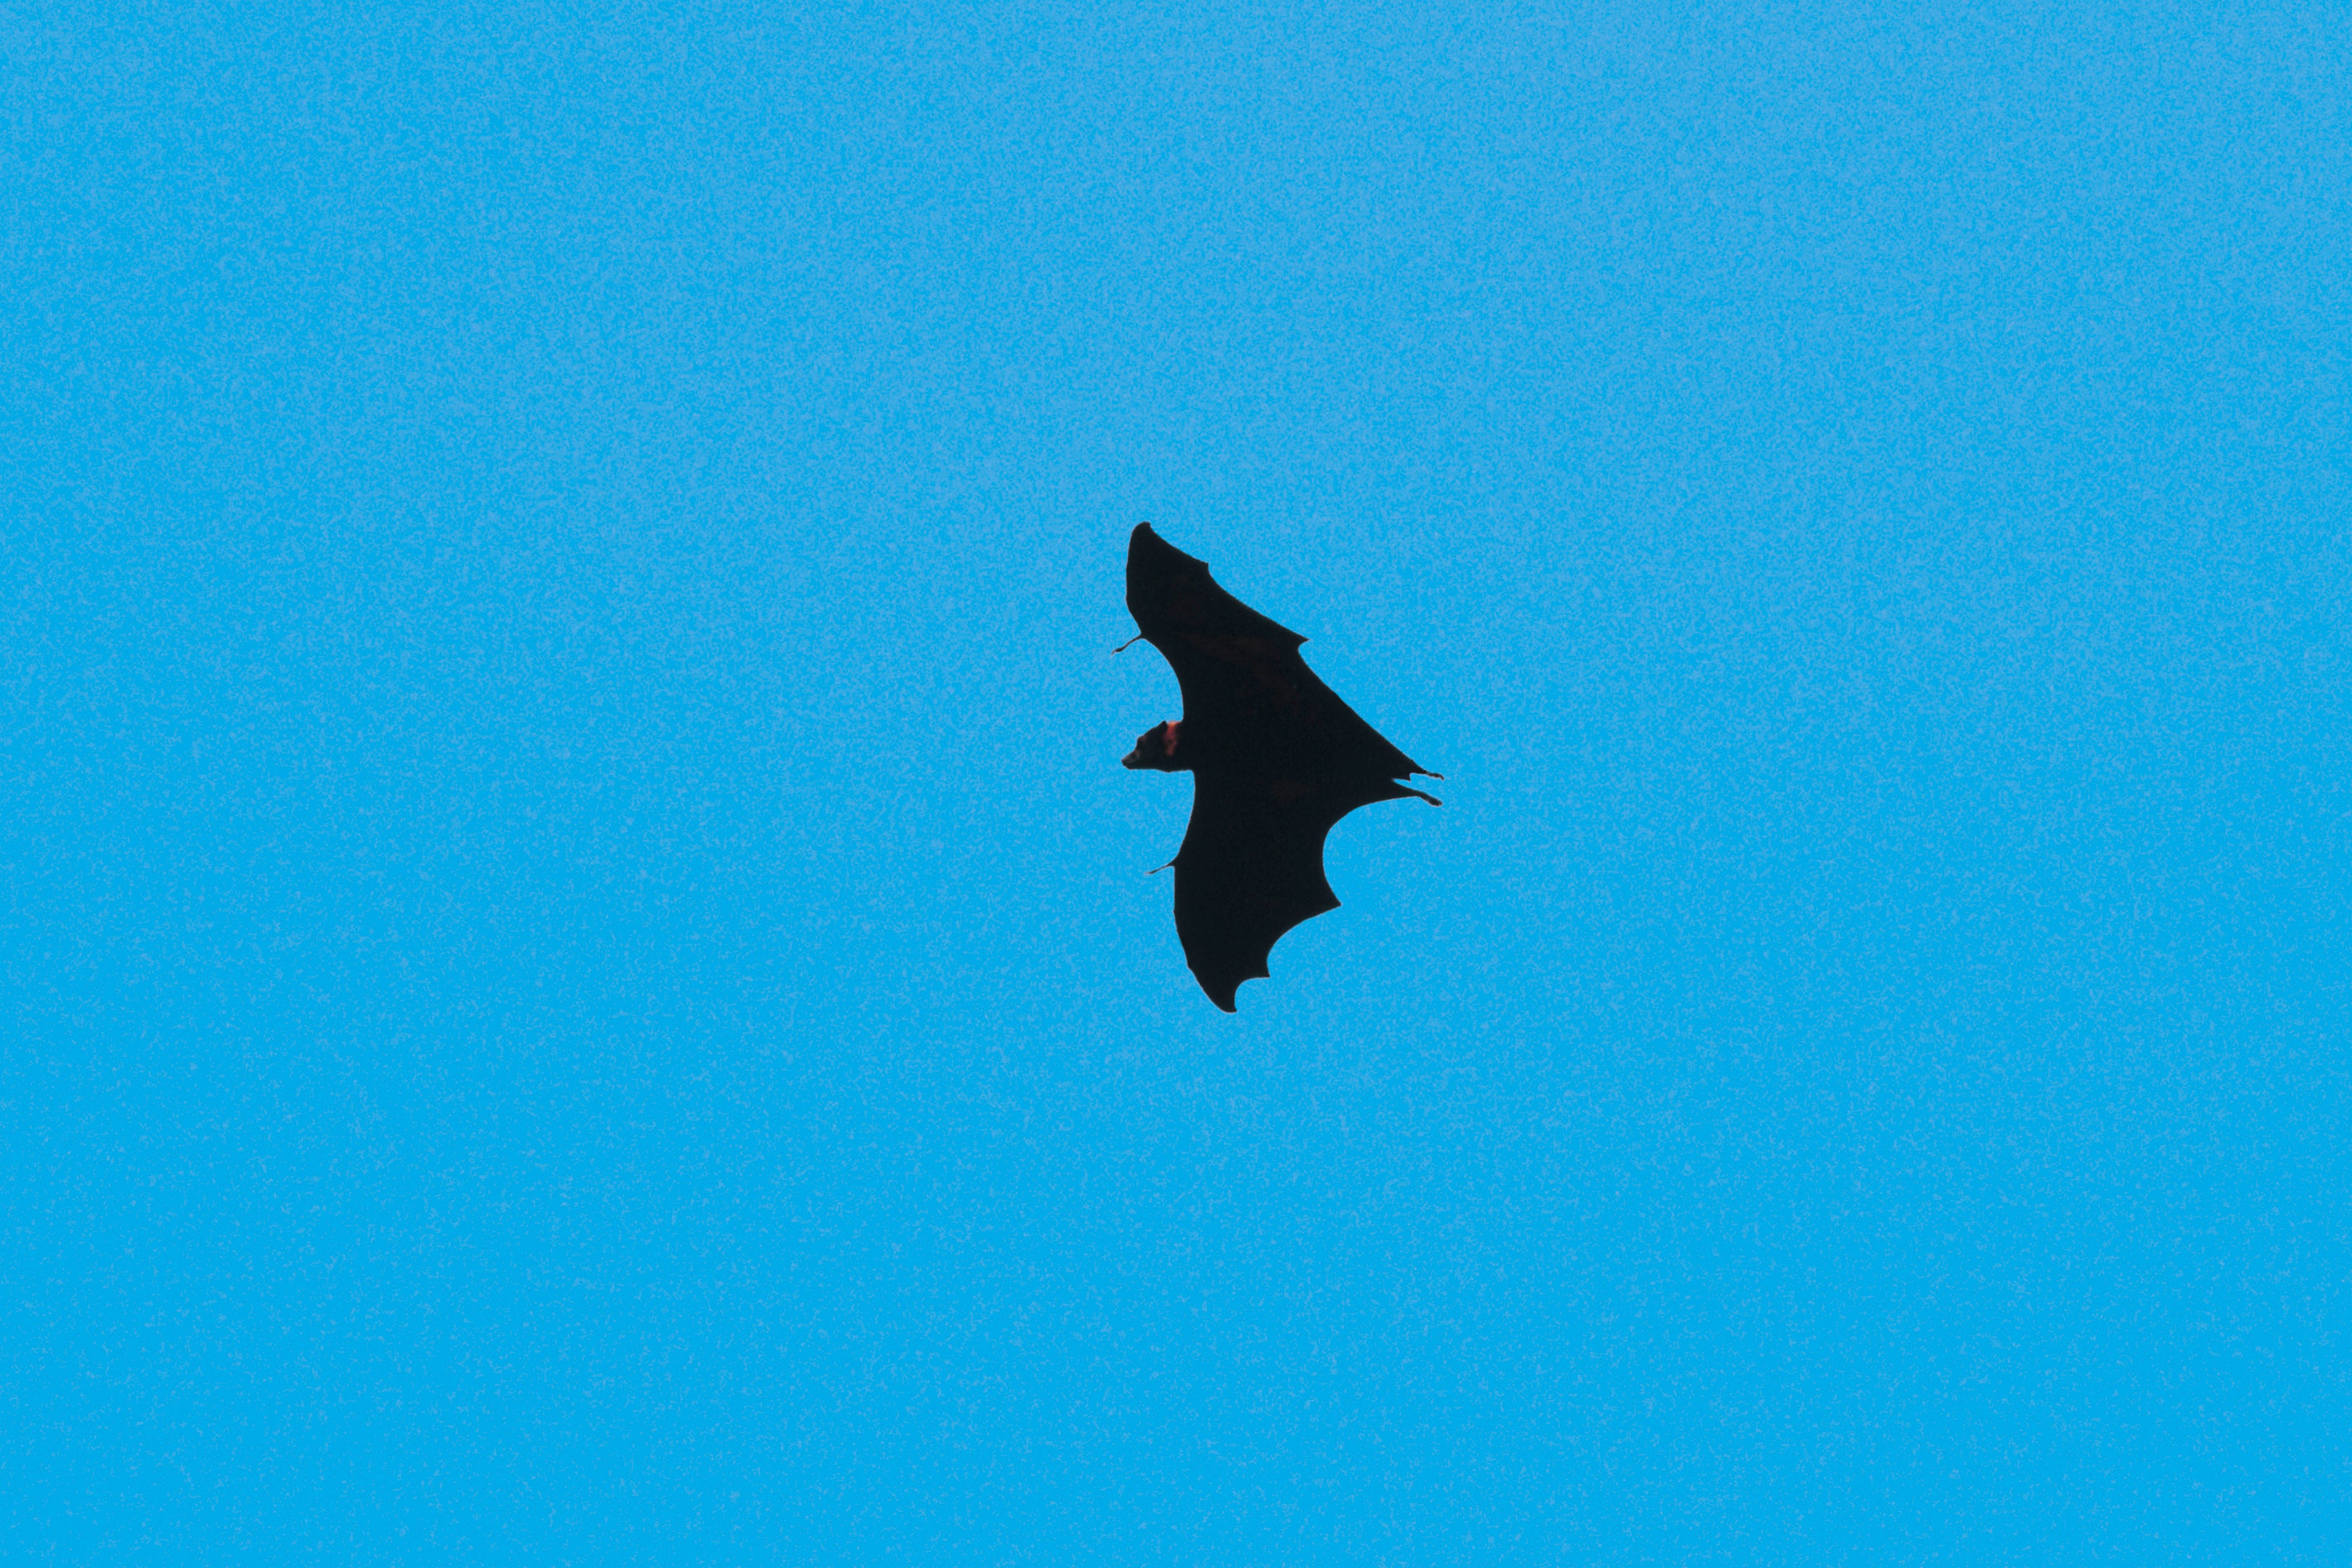 Which is faster: bat or bird?